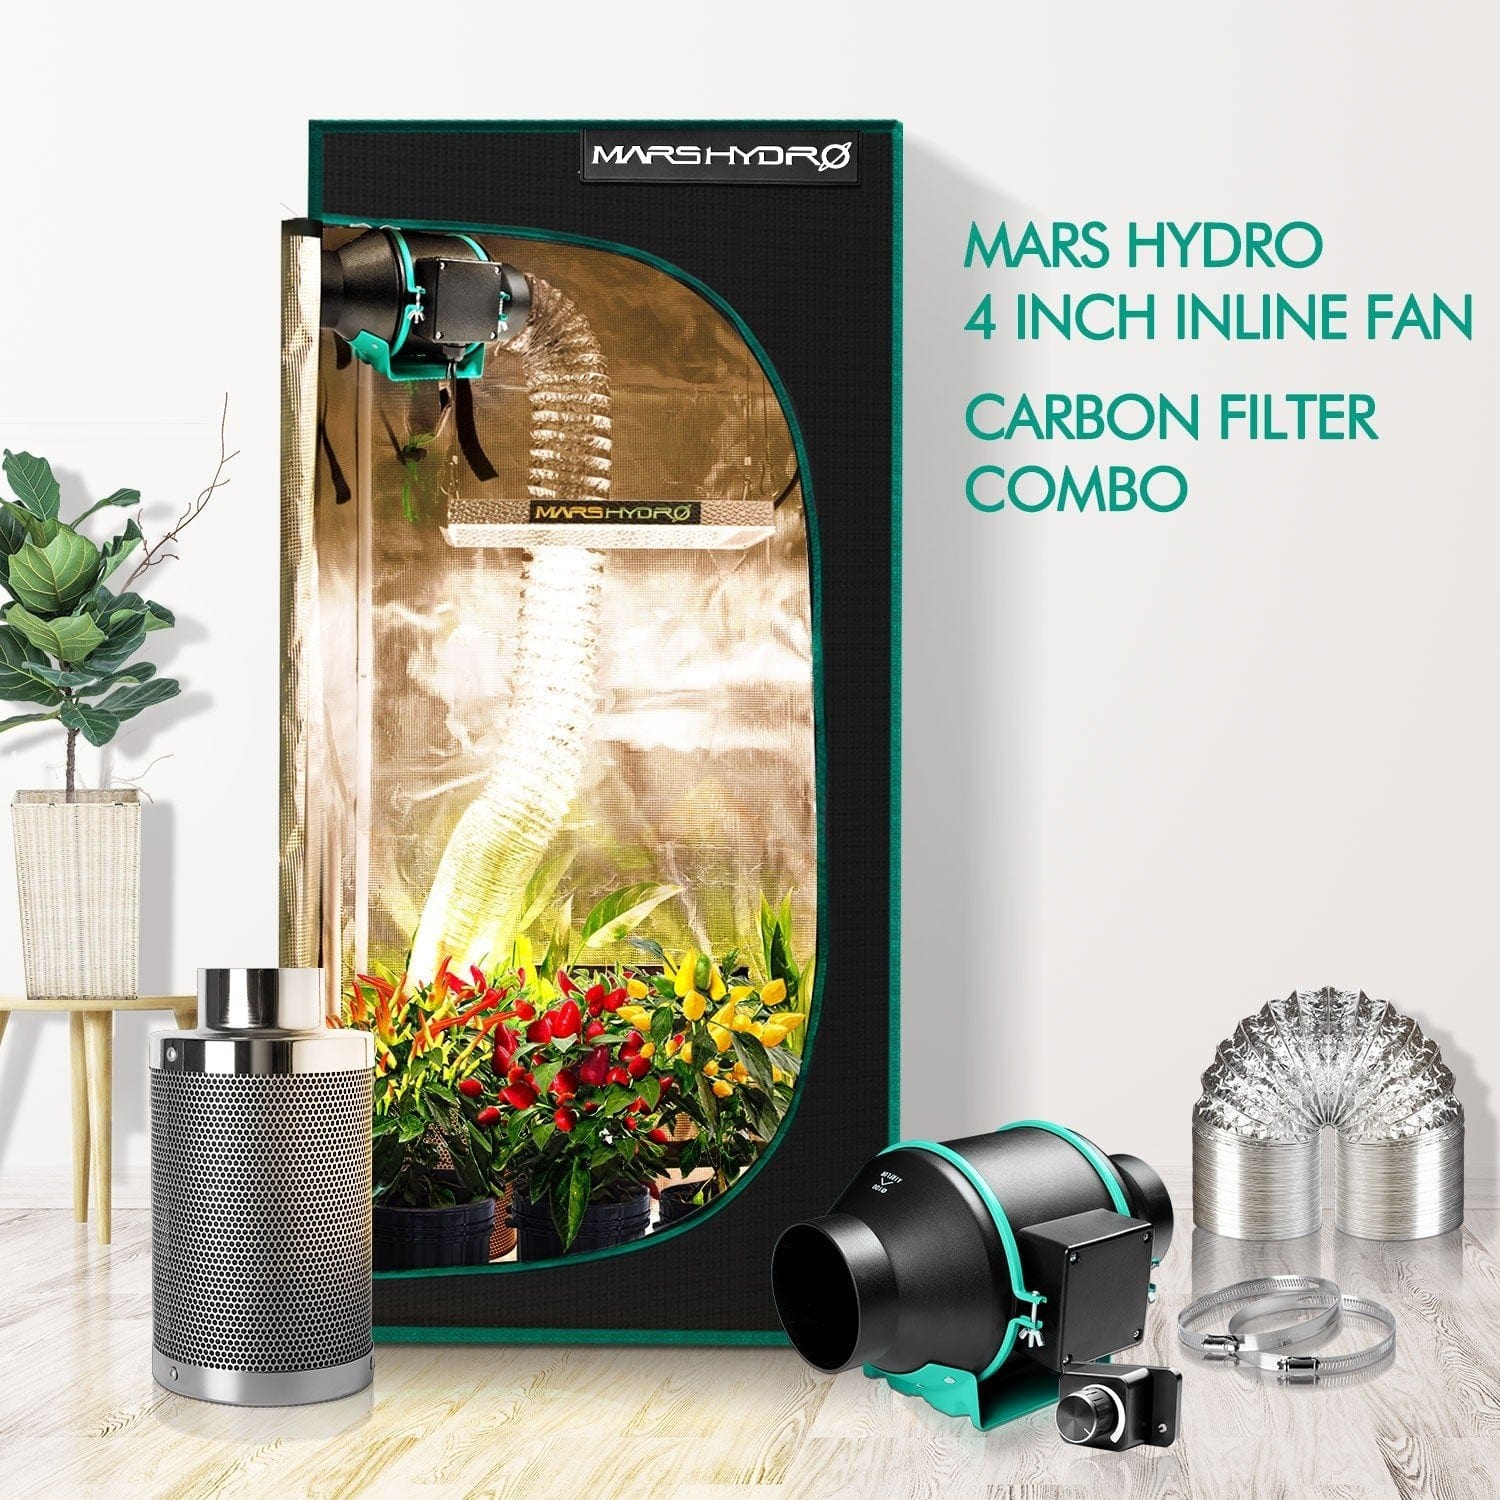 Air Filtration Kit PRO 4, Inline Fan with Smart Controller, Carbon Filter  & Ducting Combo